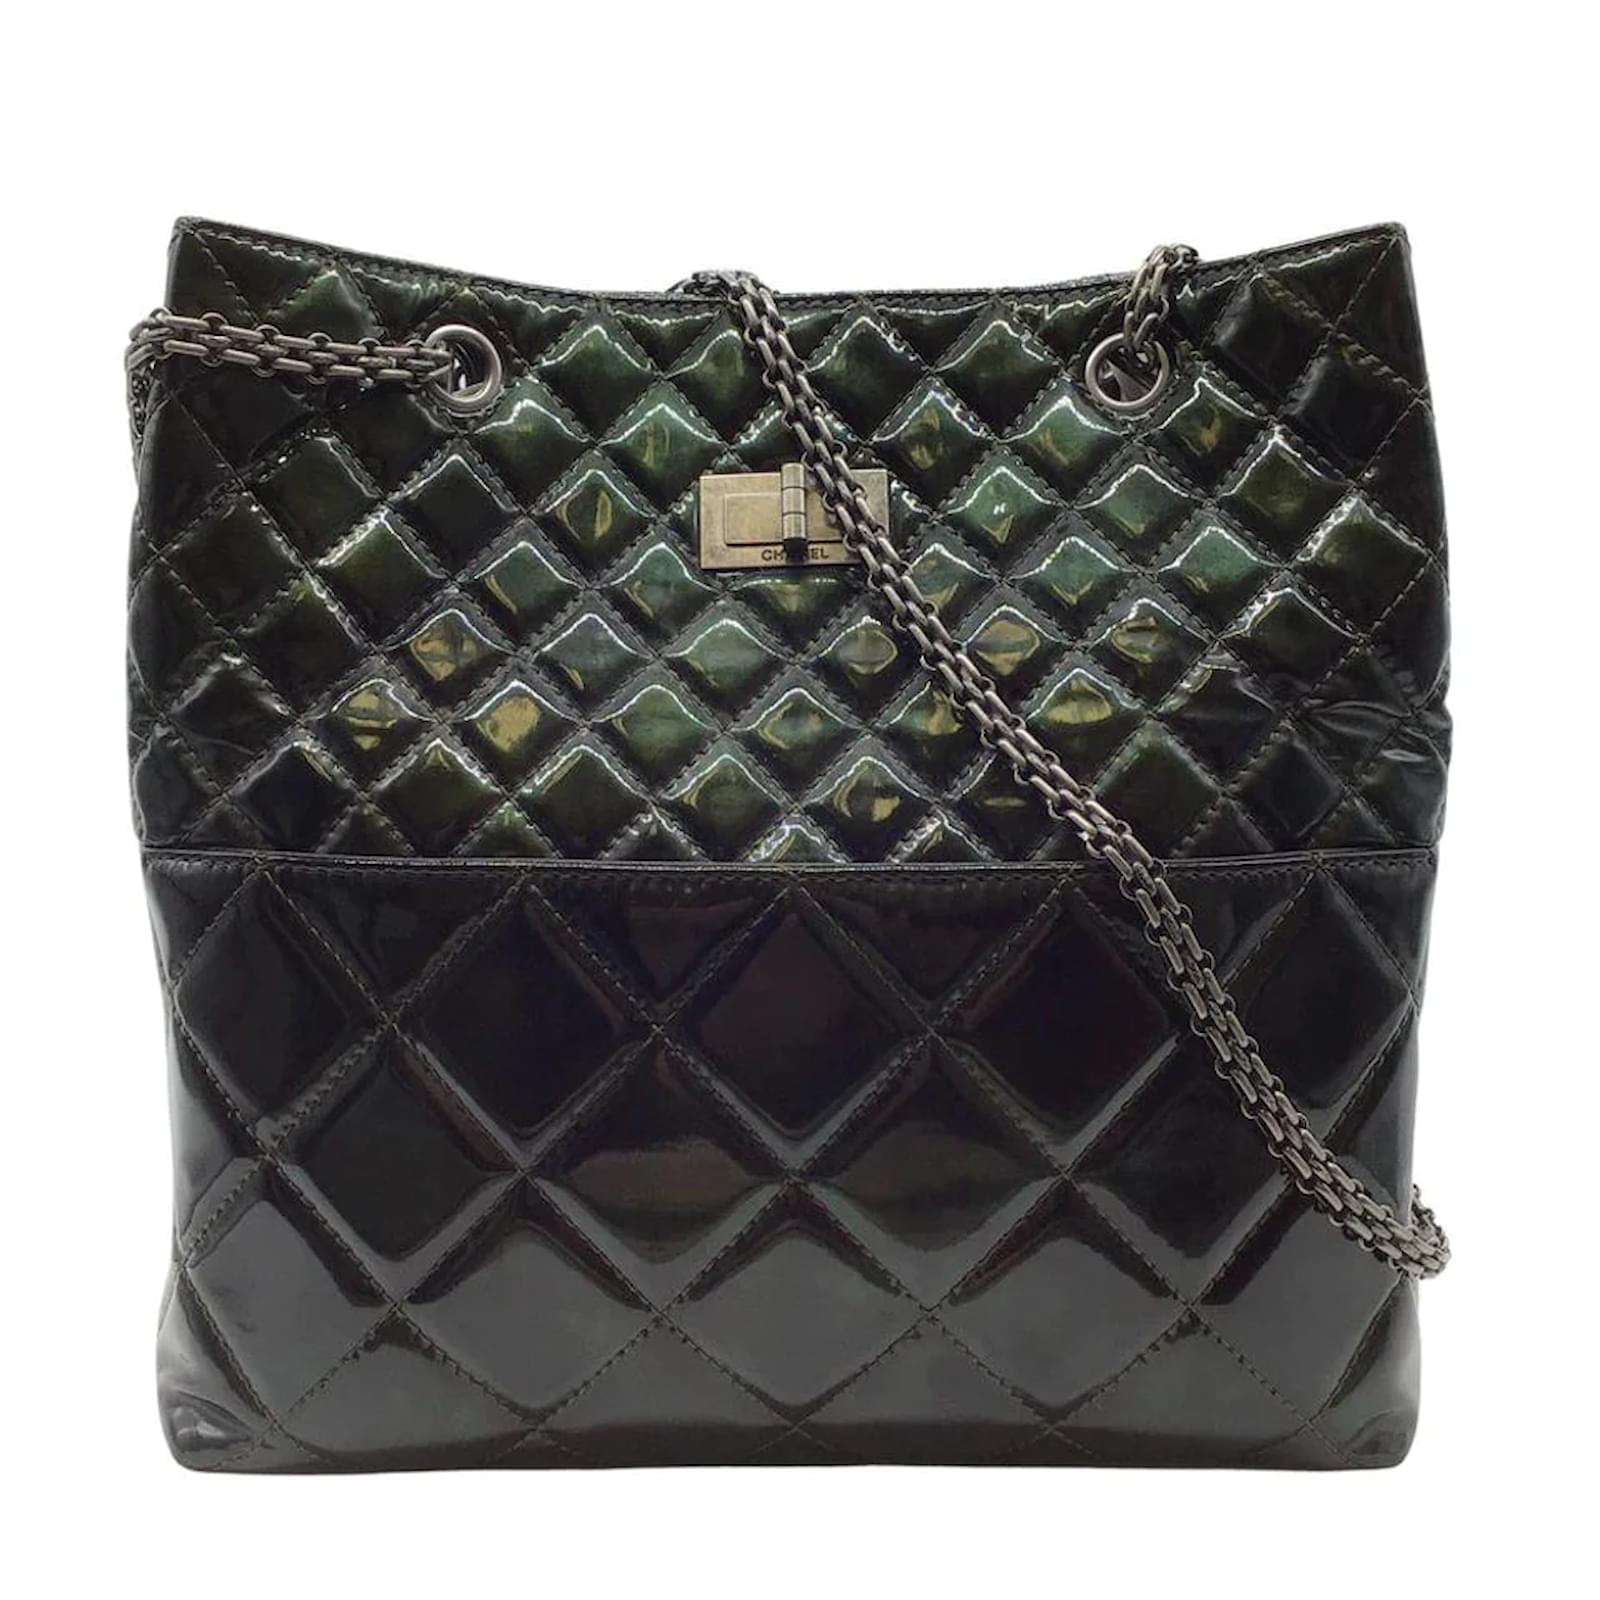 CHANEL, Bags, Chanel Cambon Tote Bag In Olive Green Lamb Leather And  Snake Skin Cc Logo